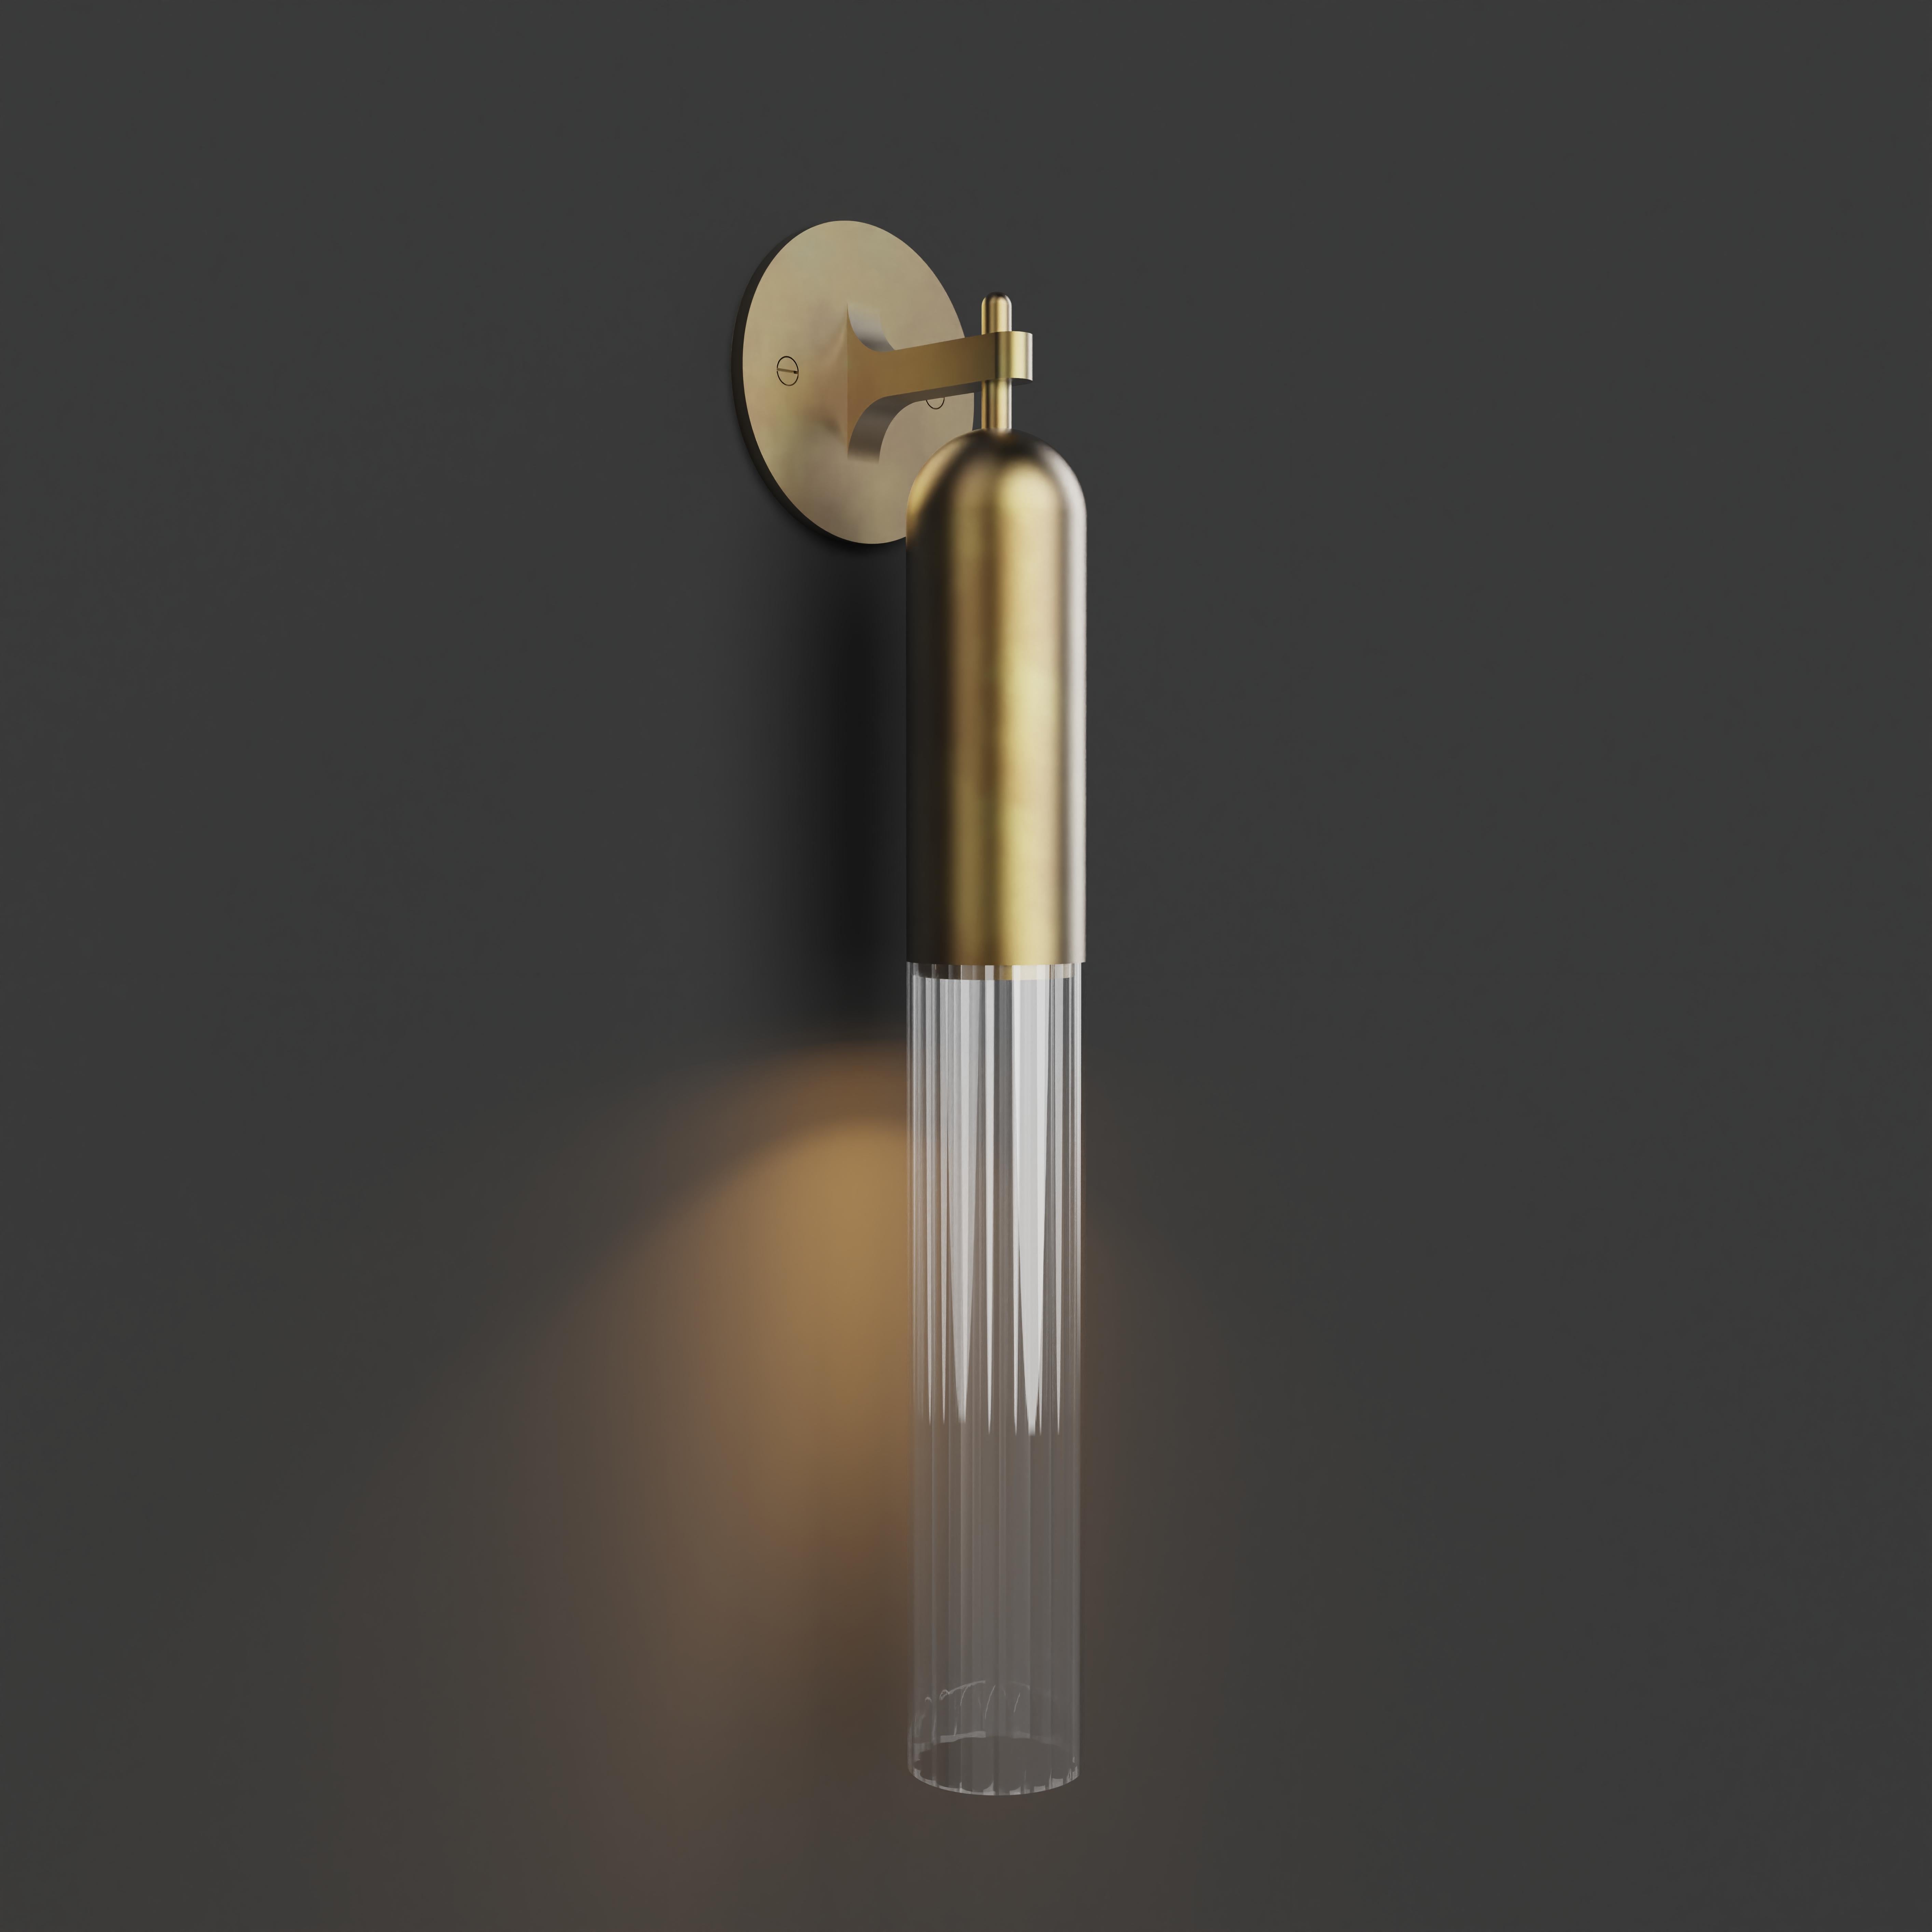 Wall Light in  brushed brass metal finish with fluted glass shade. 

Dimensions:
Overall Height: 450mm 
Glass Dia: 60mm 
Overall projection: 100mm 
Backplate Dia: 110mm
Integrated LED

 Made to order to buyer's specification. Variations to